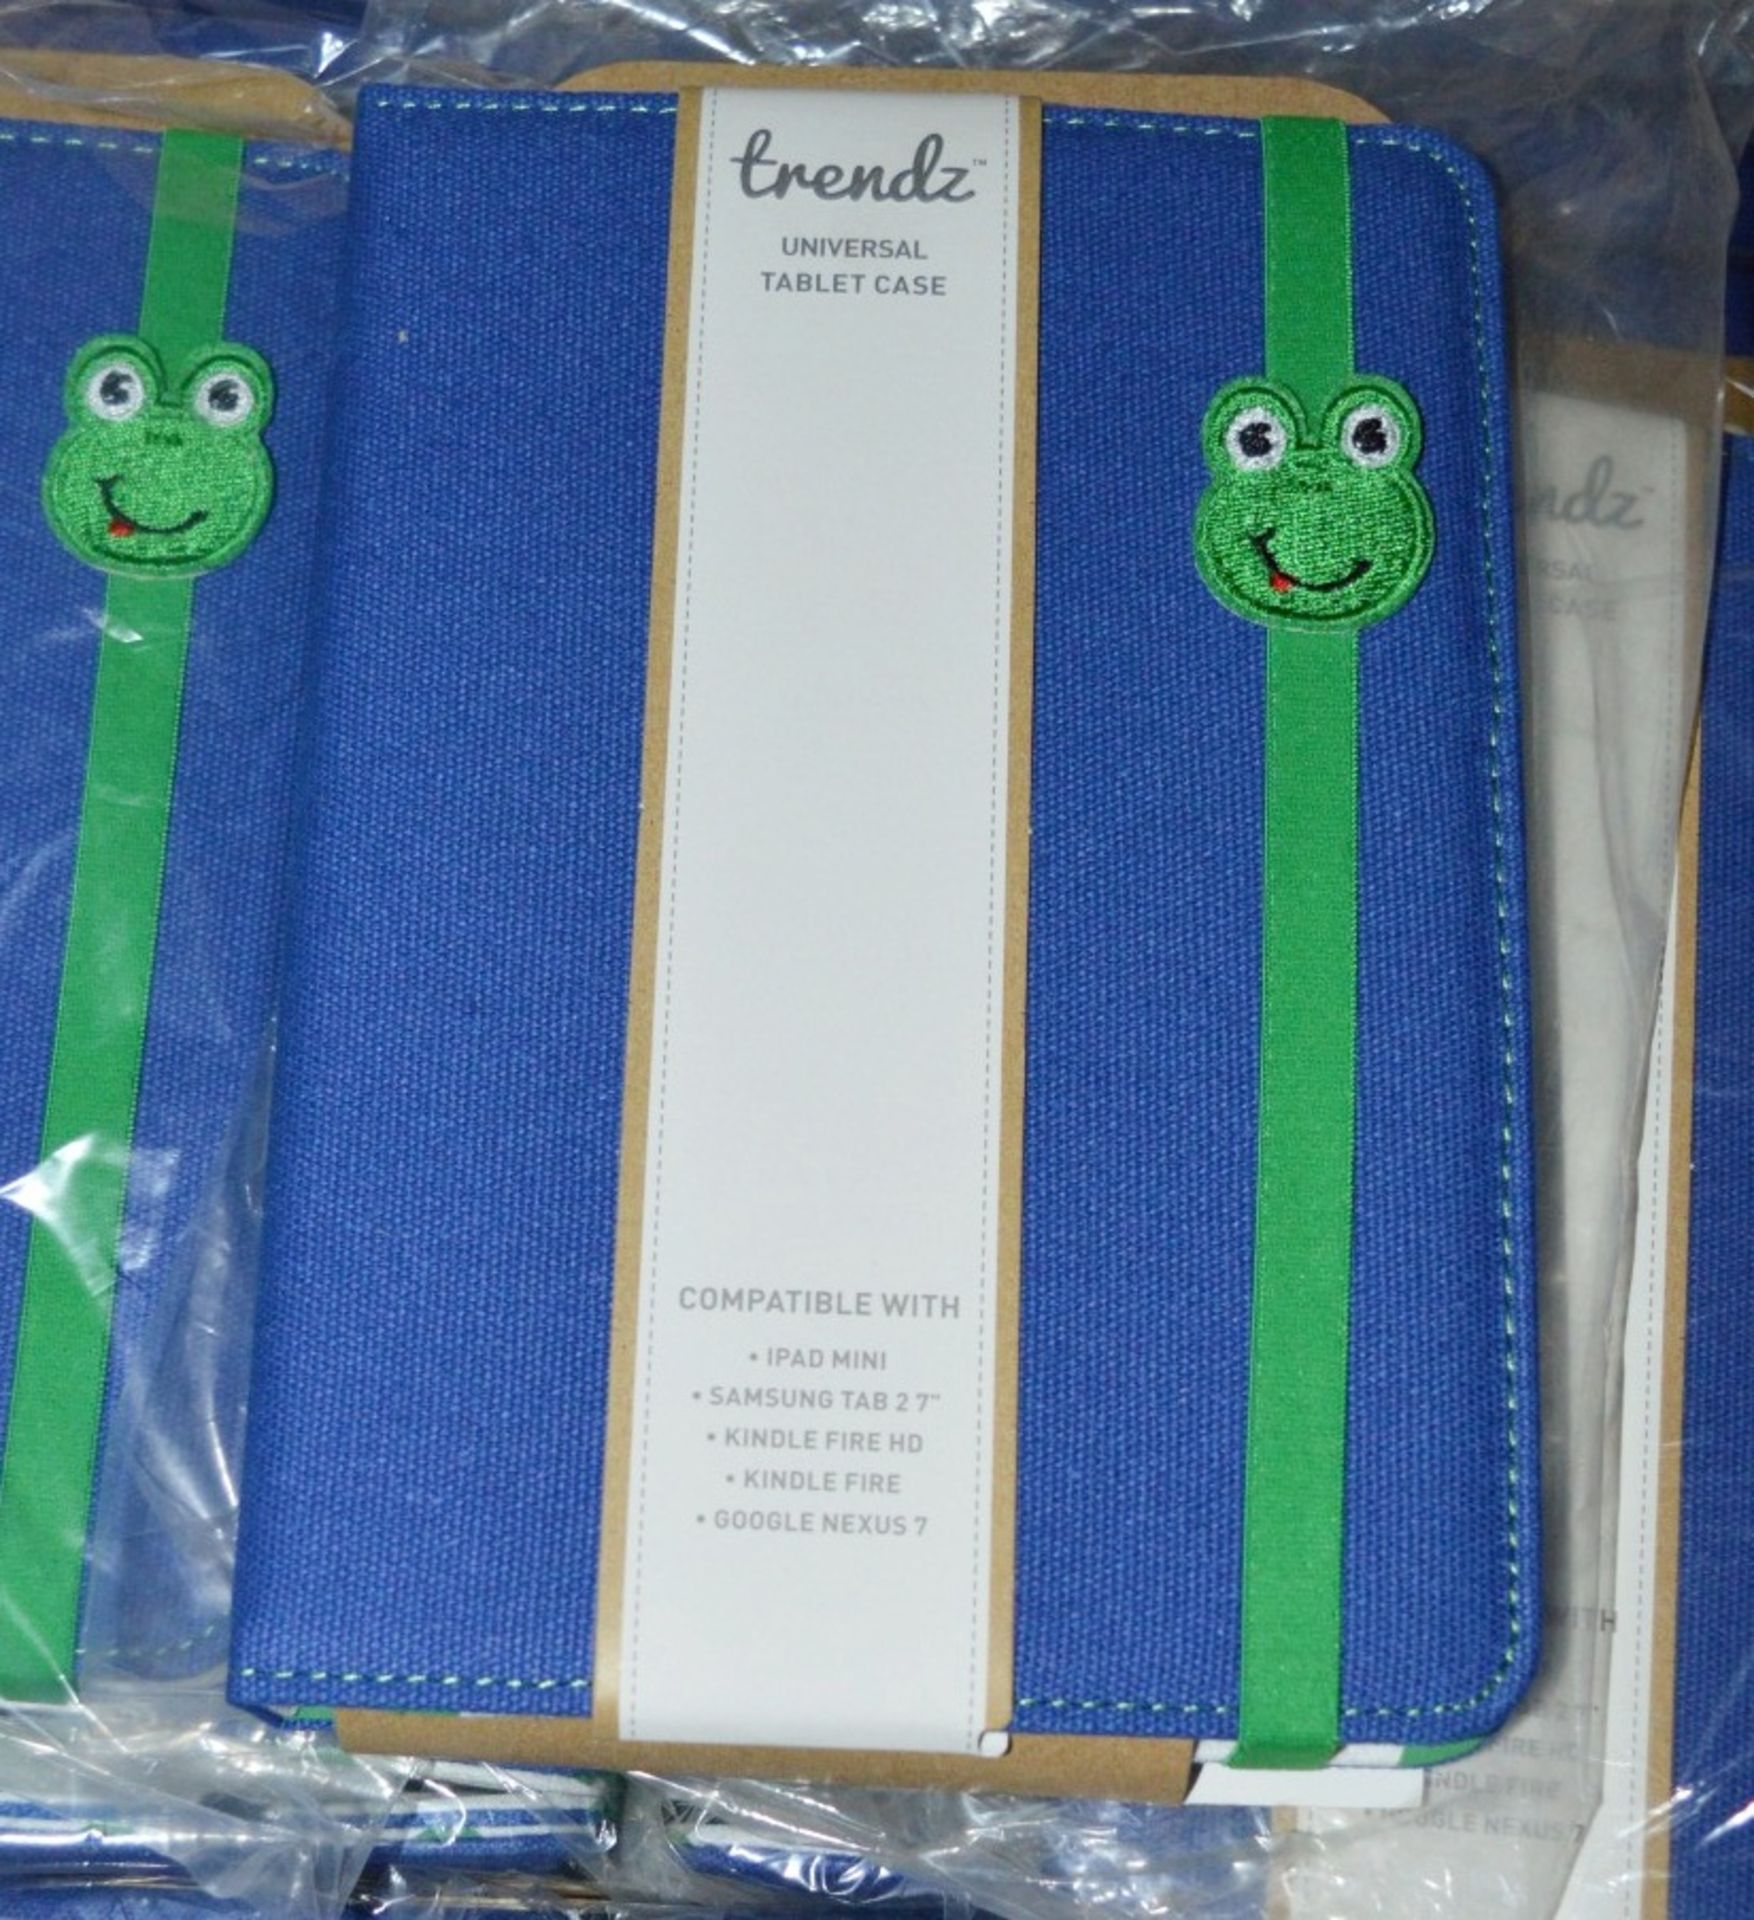 31 x 7" Universial Tablet Cases - New / Unused Stock - Great Resale Potential - Supplied As - Image 2 of 4